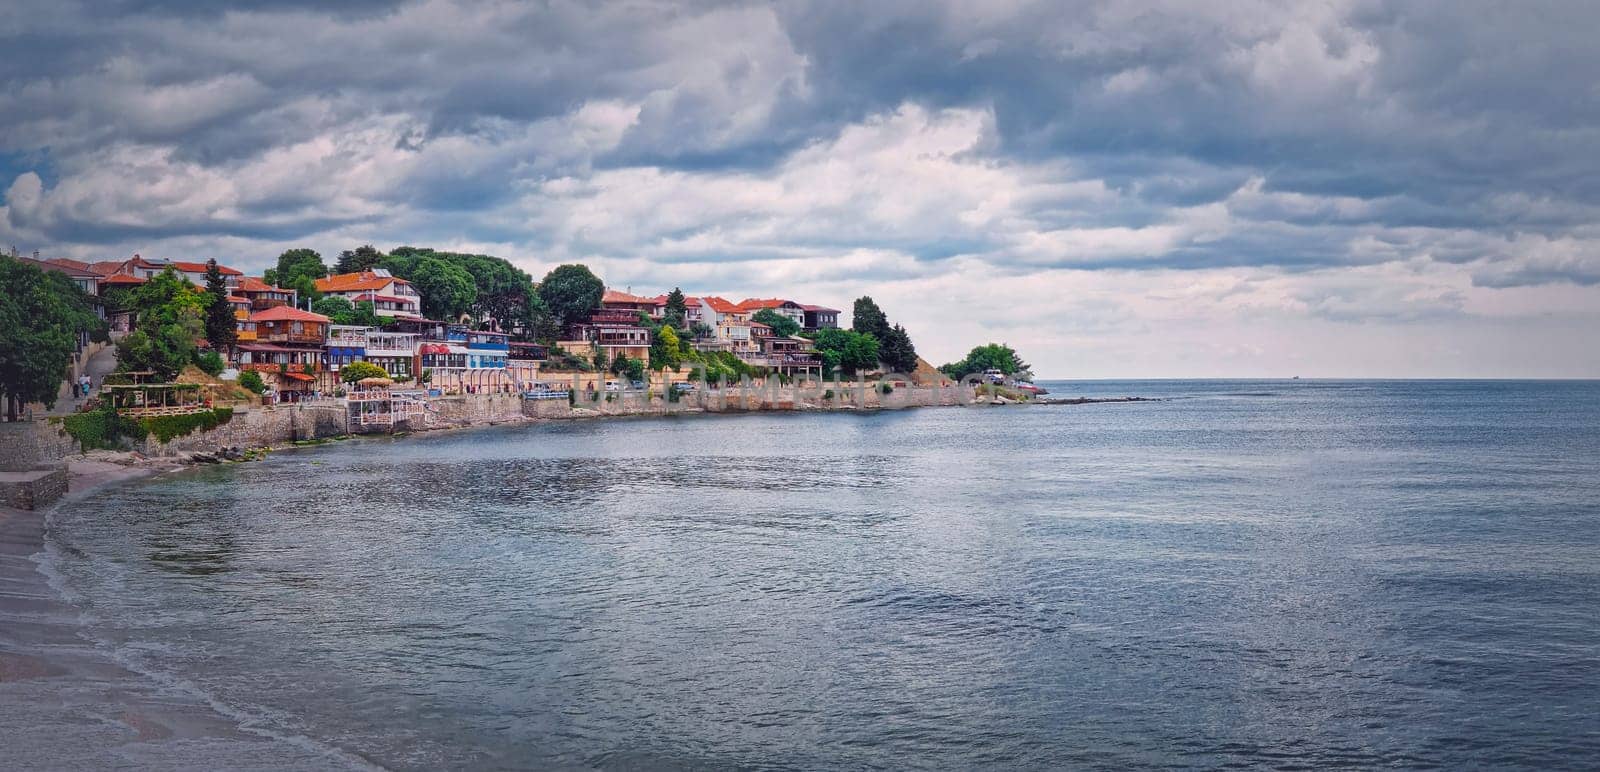 The old town of Nessebar, UNESCO world heritage on the Black Sea coastline, Burgas Region, Bulgaria. Sightseeing panorama with ancient houses on the coast